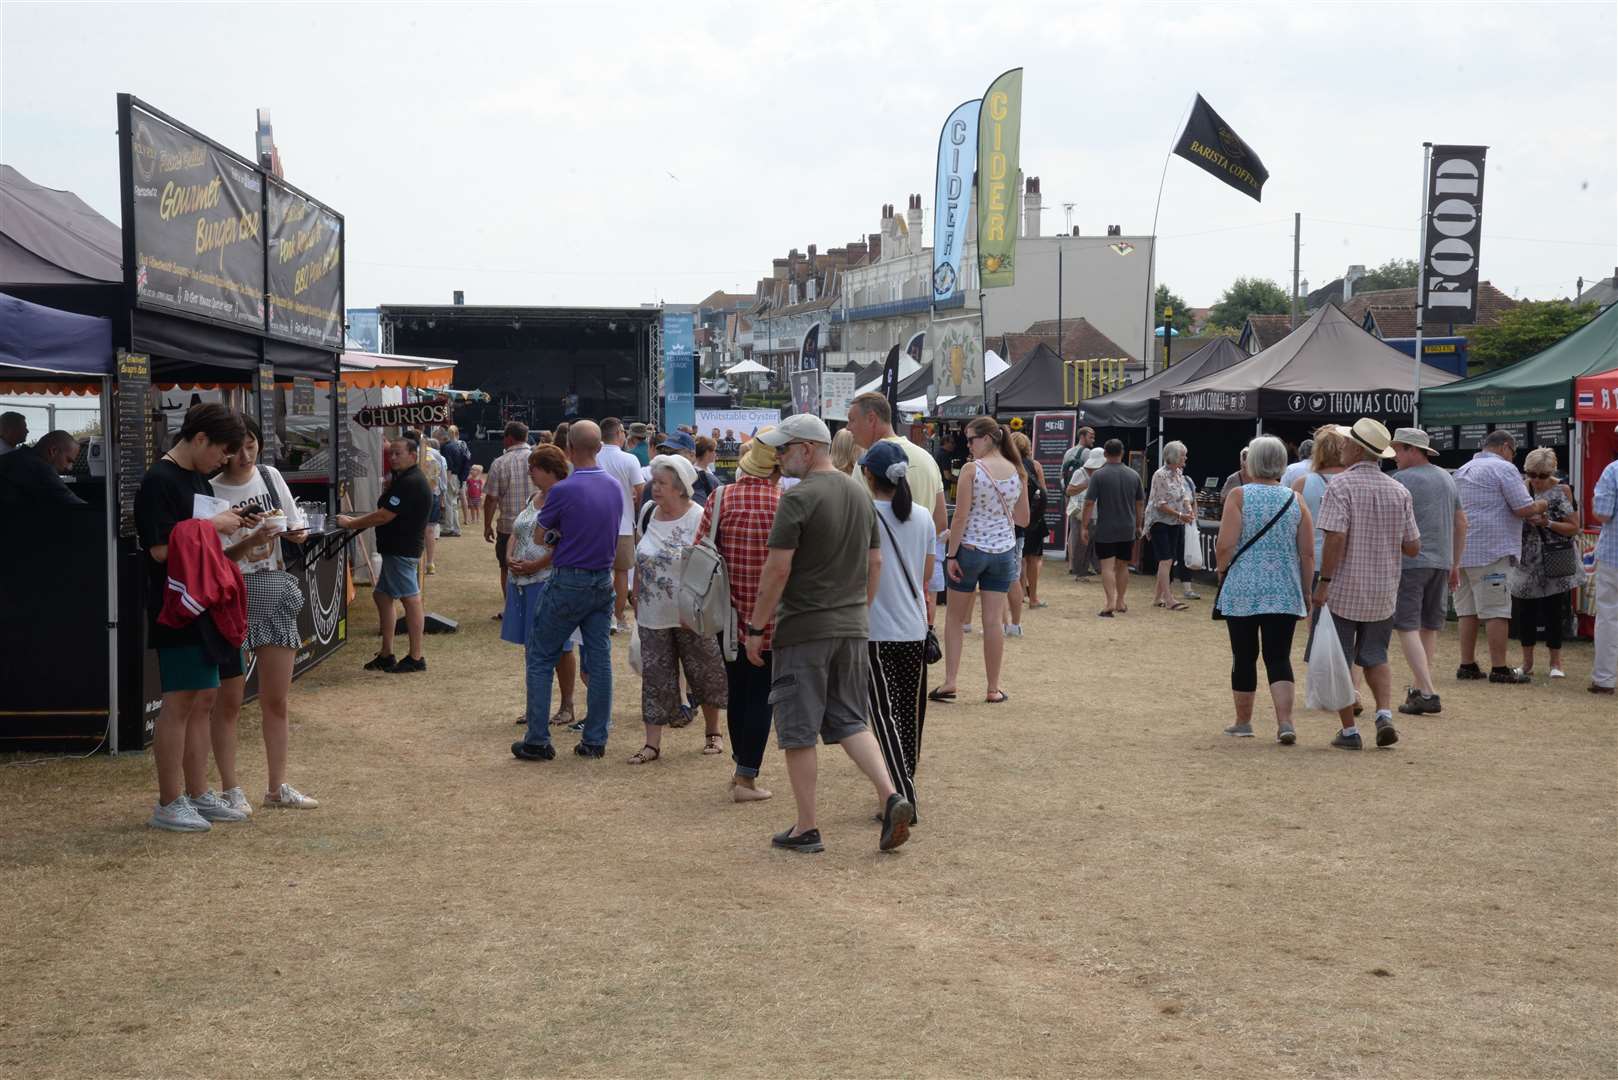 Changes have been made to this year's food fair